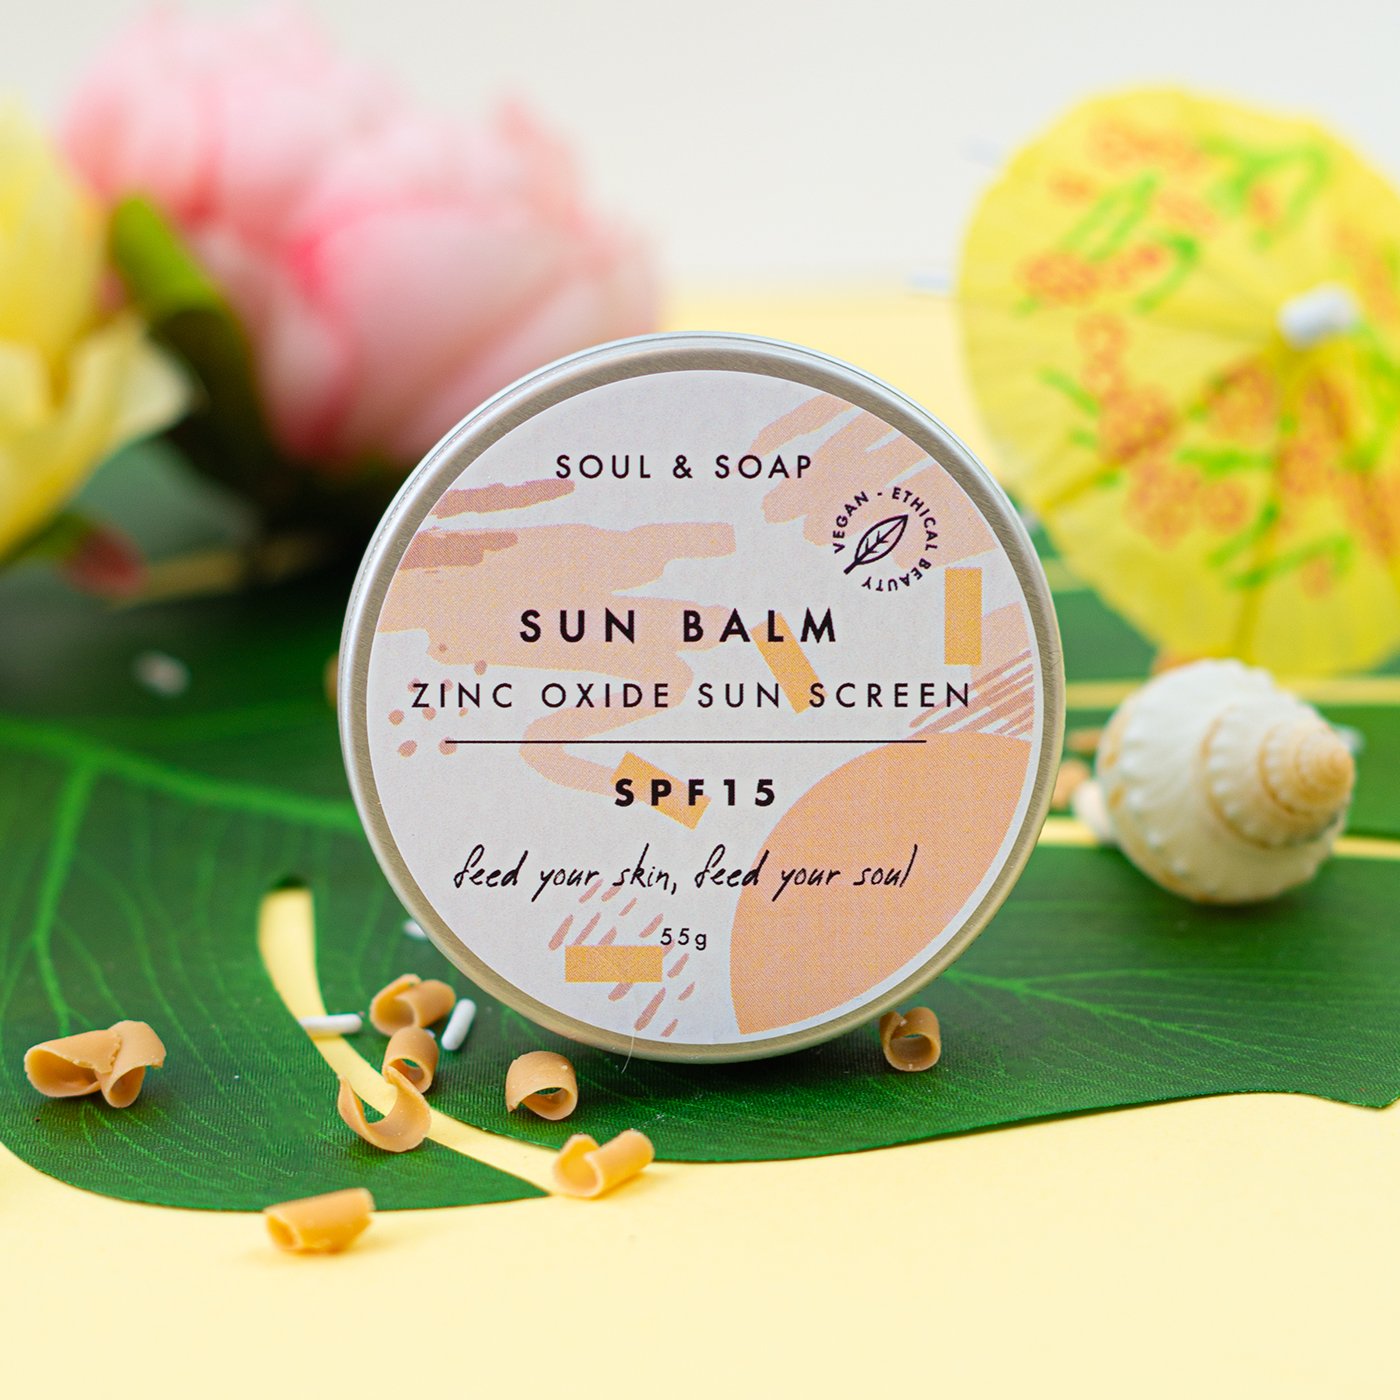 Soul & Soap Sun Balm SPF15 | All natural, mineral based sunscreen for your face, enriched with Vitamin E | Low Waste | Plastic Free | Cruelty Free